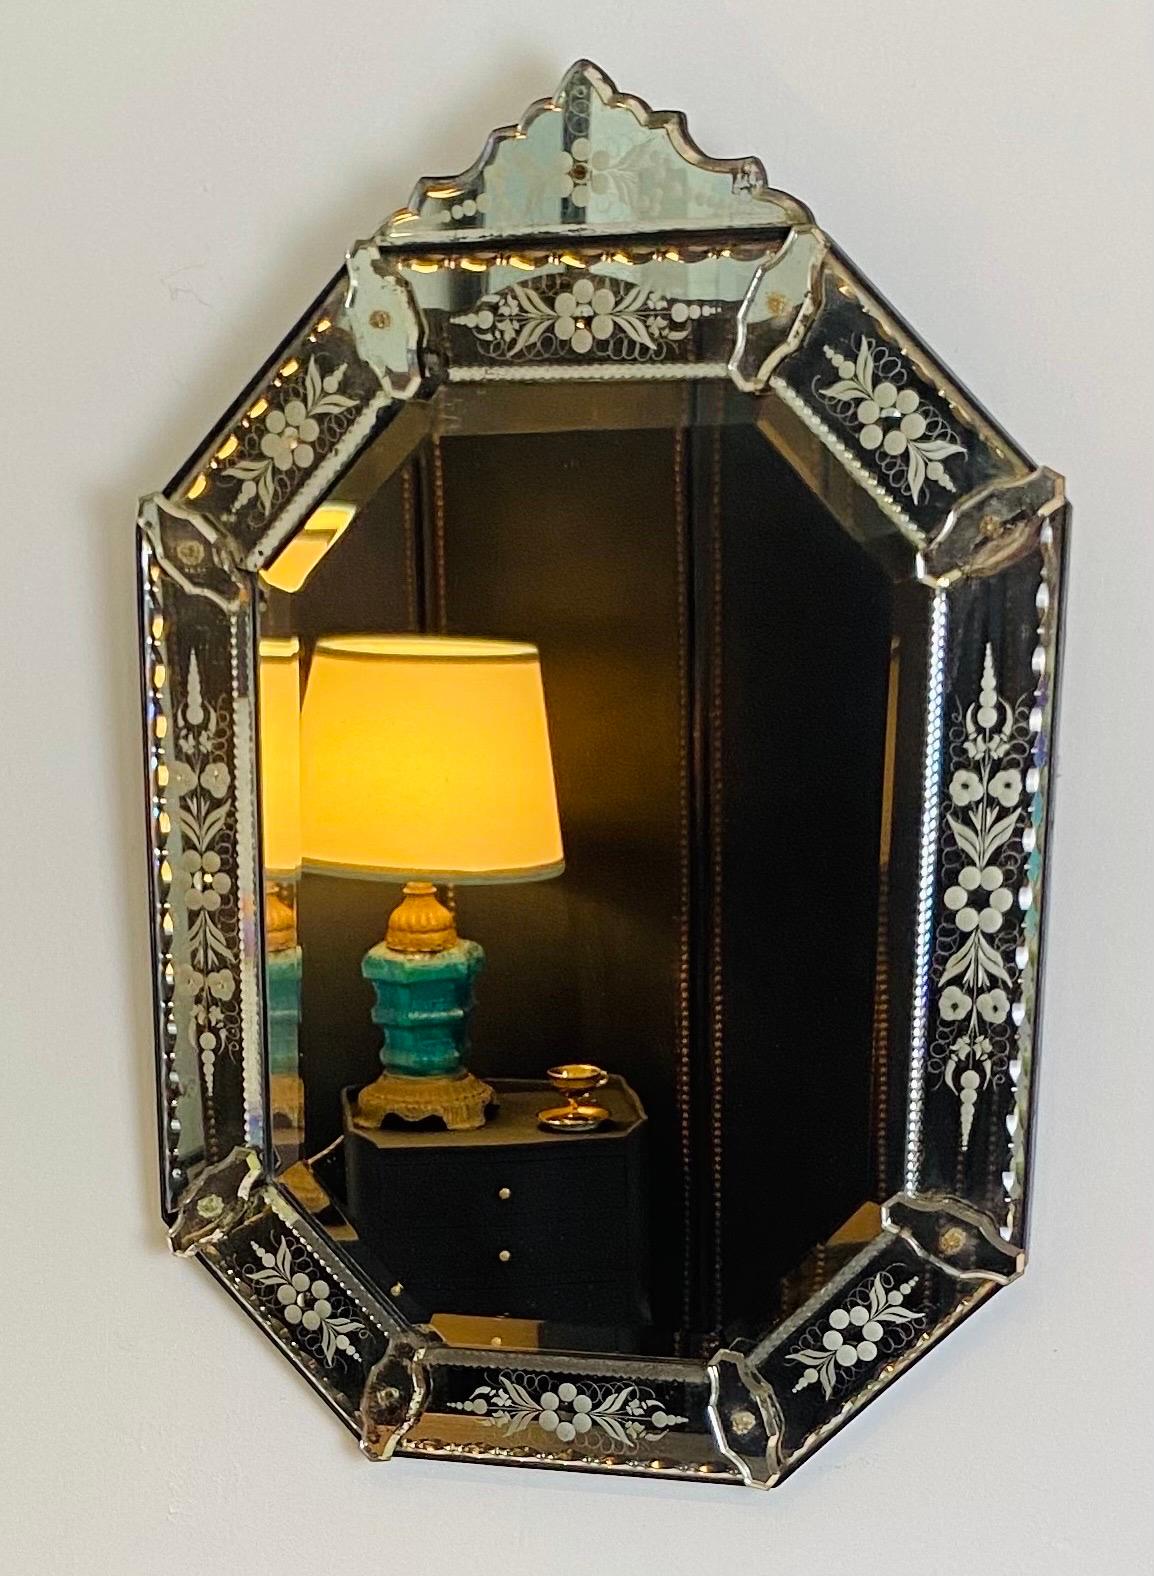 Very beautiful Louis XIV / Regency style glazing bead mirror
Beveled glass.
The glass is finely and beautifully etched with flowers and foliage.
Wooden structure.
Mercury mirror.
Very decorative, stylish and elegant.
Italian work. Venice. XIXth
The